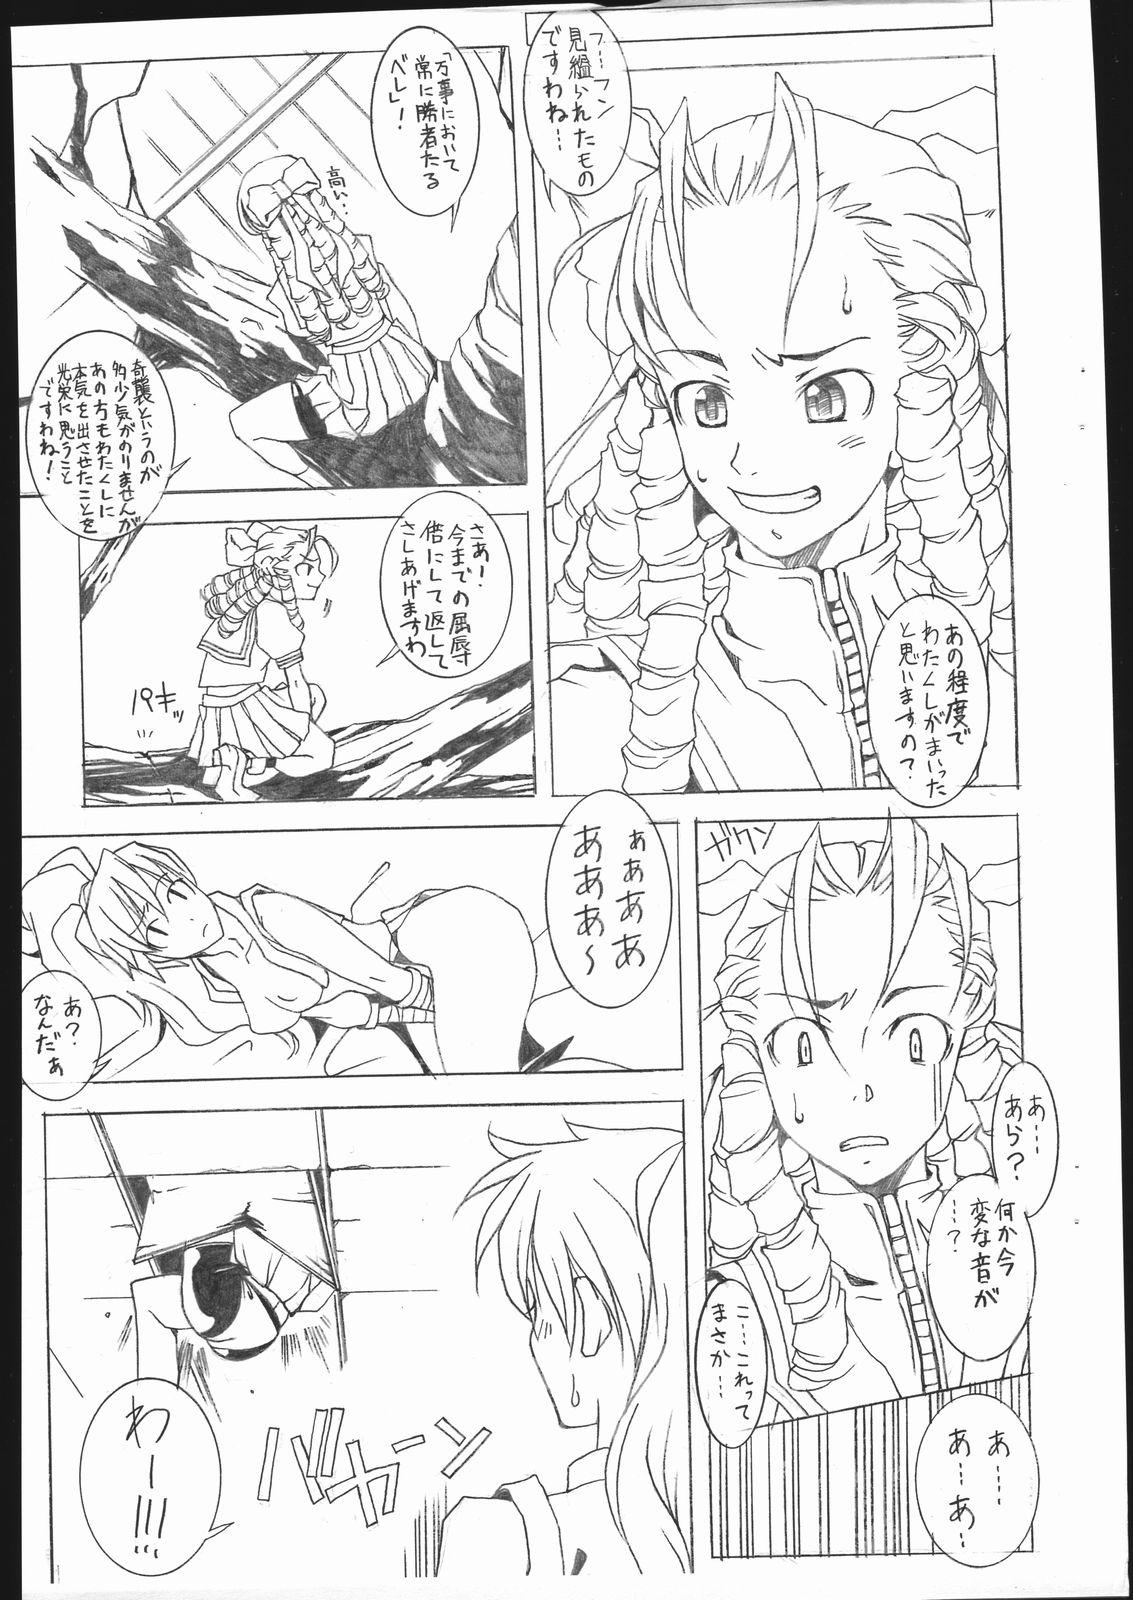 Doublepenetration M&K - Street fighter Final fight White Girl - Page 7